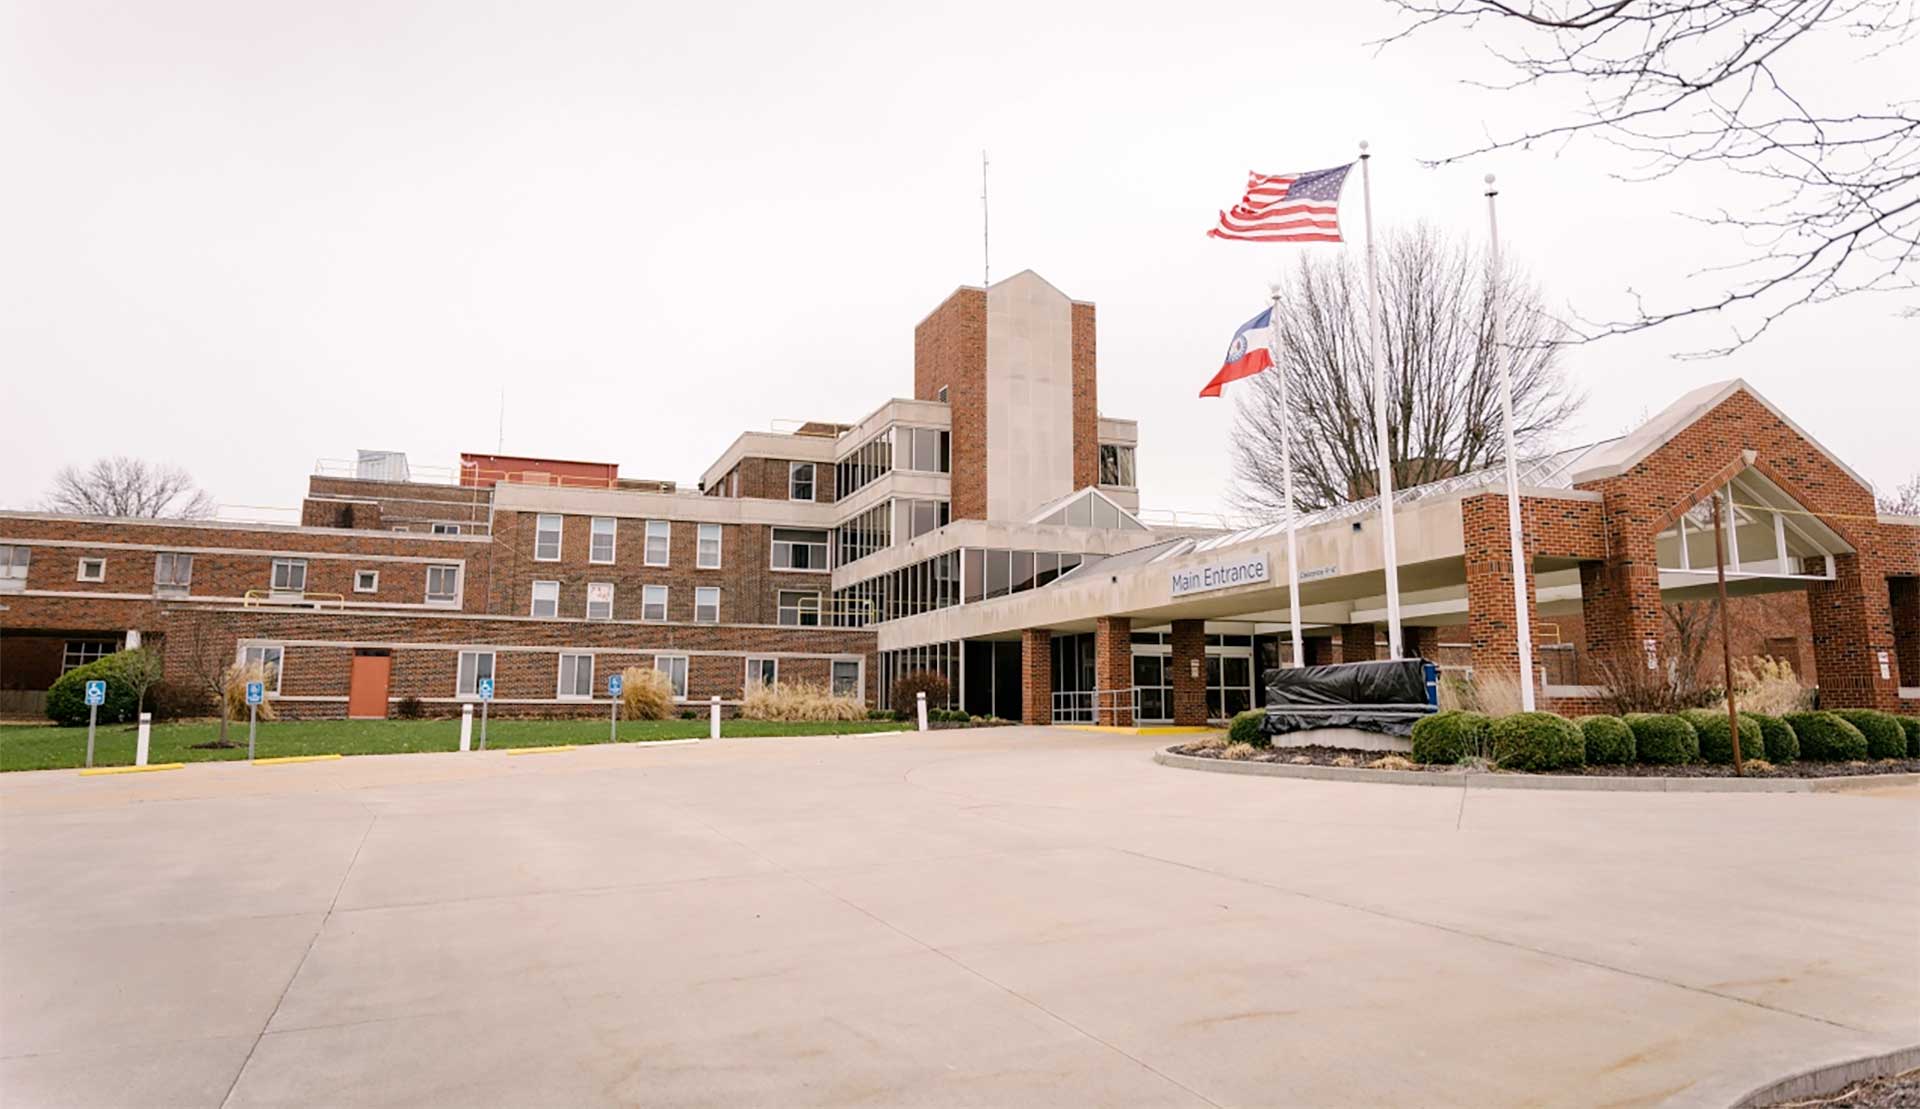 n late March, Noble Health announced it was suspending all services at two of its Missouri Hospitals­­ — Audrain Community Hospital (above) and Callaway Community Hospital 30 miles away. (Joe Martinez for KHN)